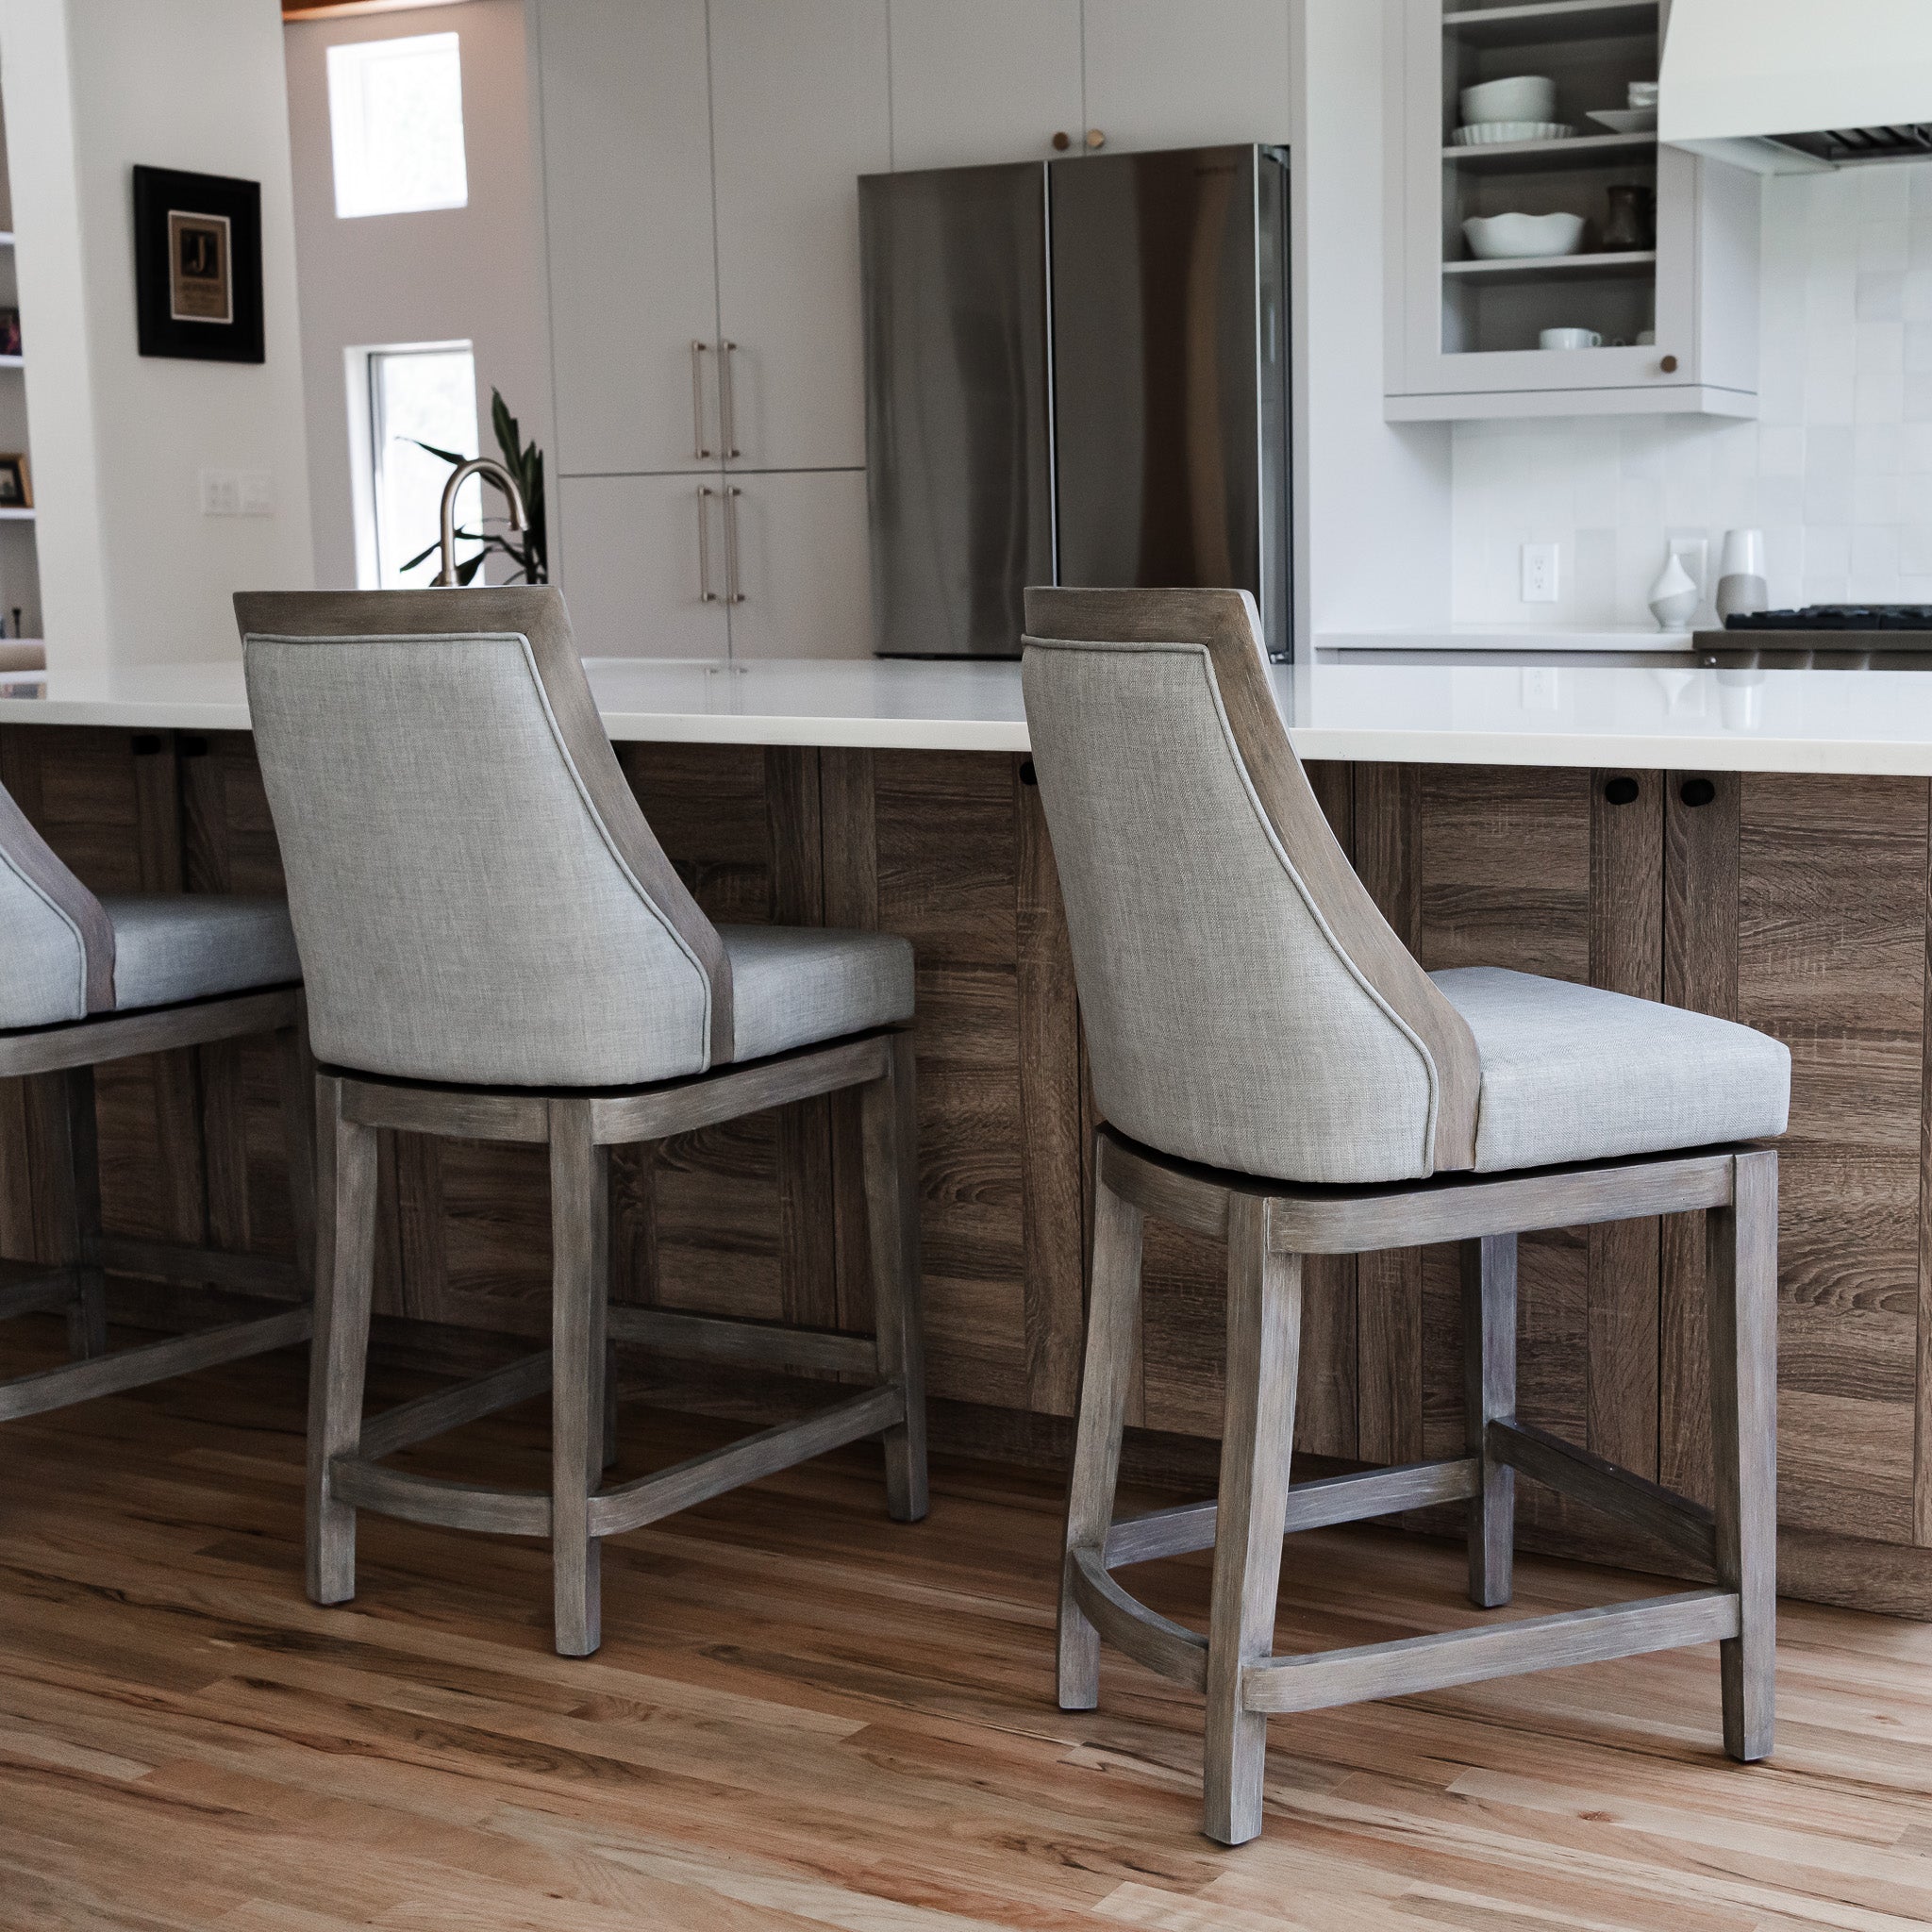 Vienna Counter Stool in Reclaimed Oak Finish with Ash Grey Fabric Upholstery in Stools by Maven Lane